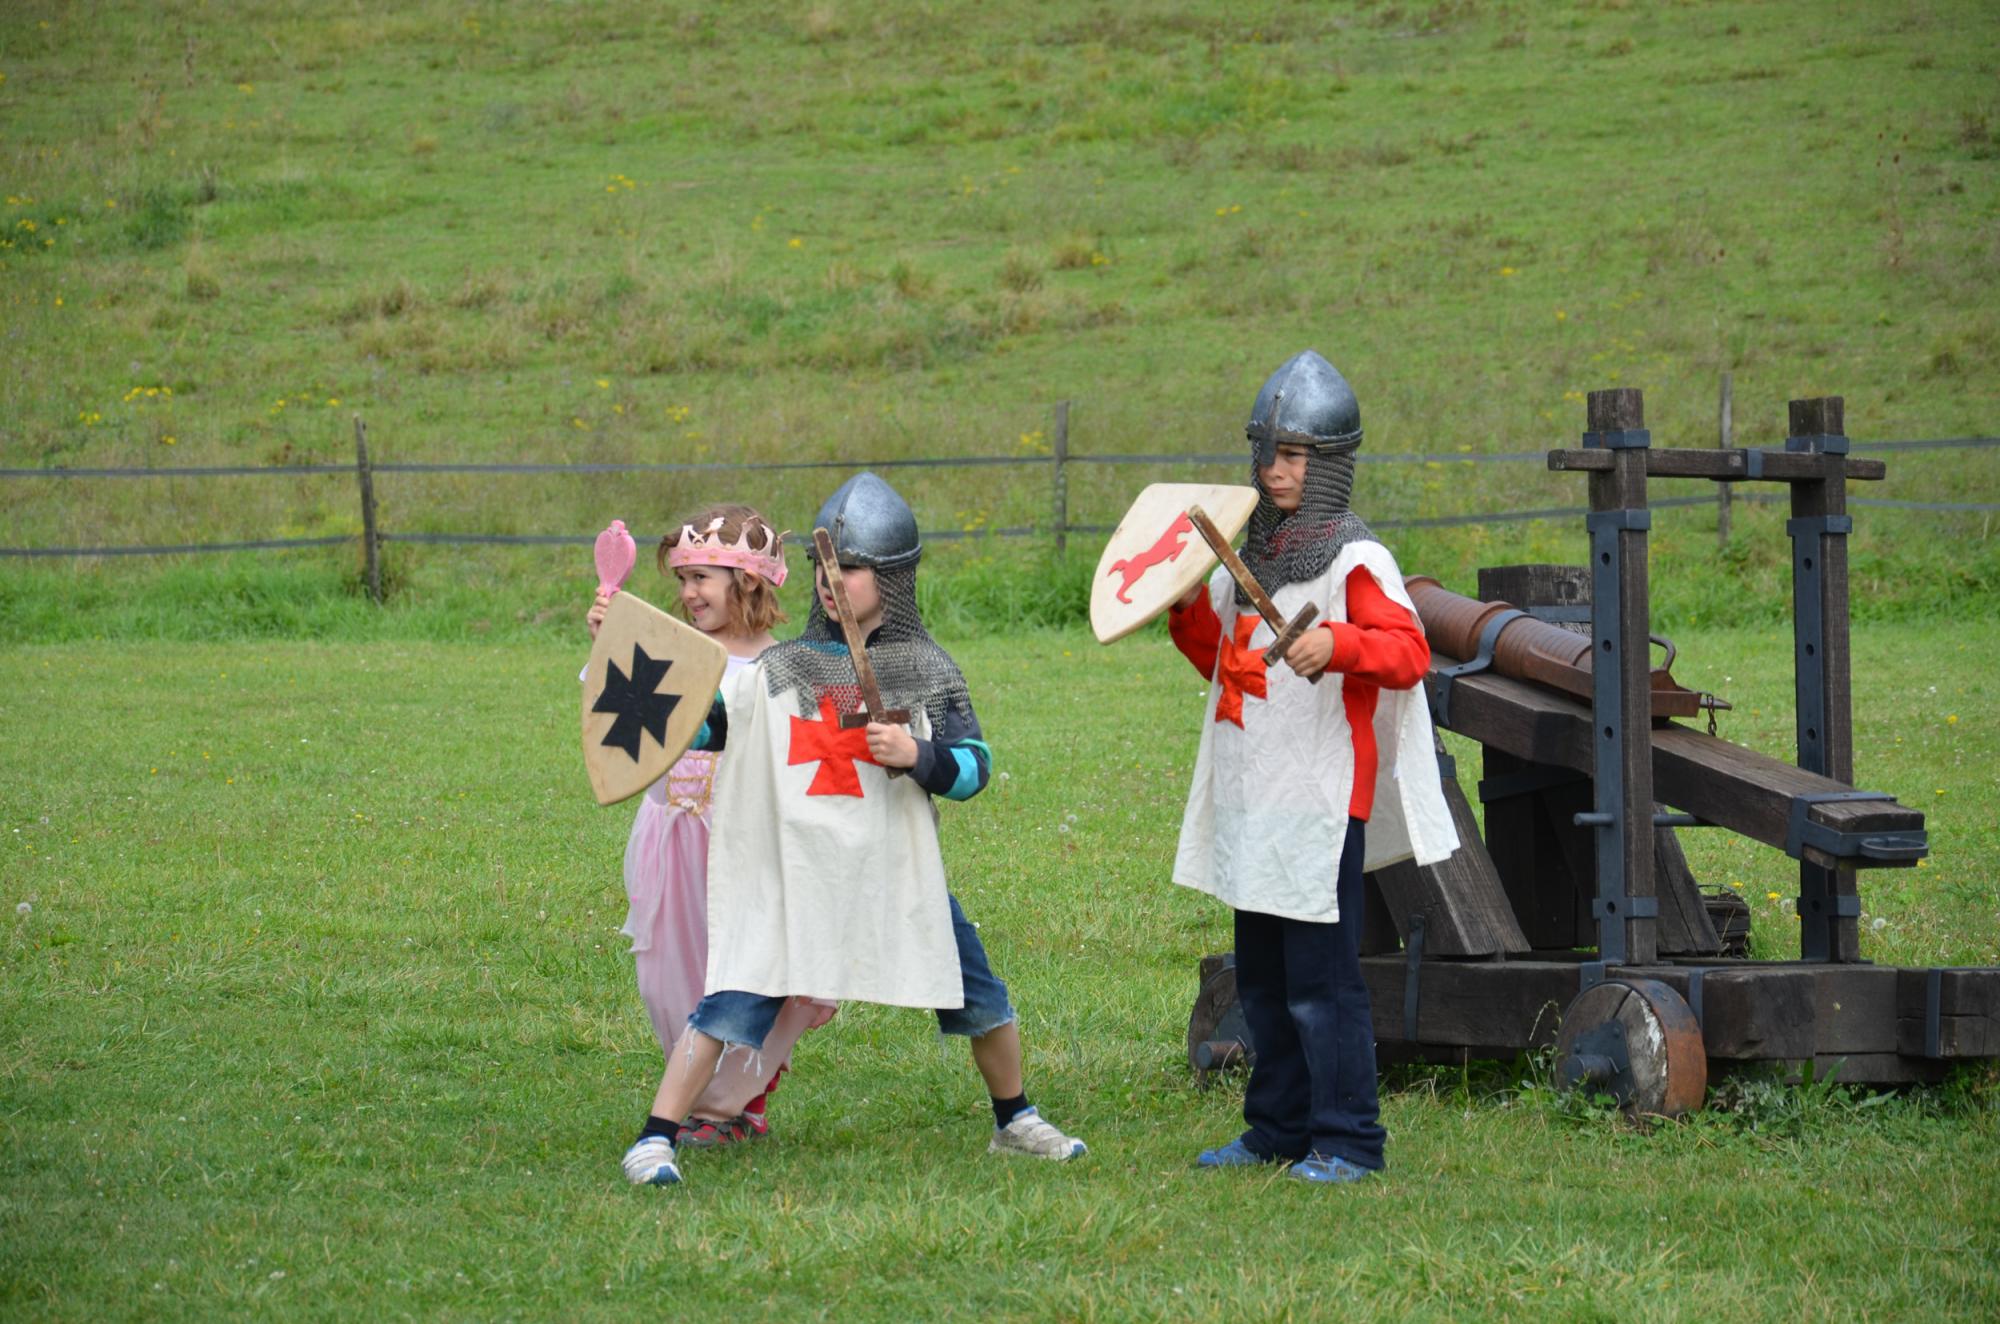 A visit in costume in the fortified castle and medieval theme park in Charente Maritime 